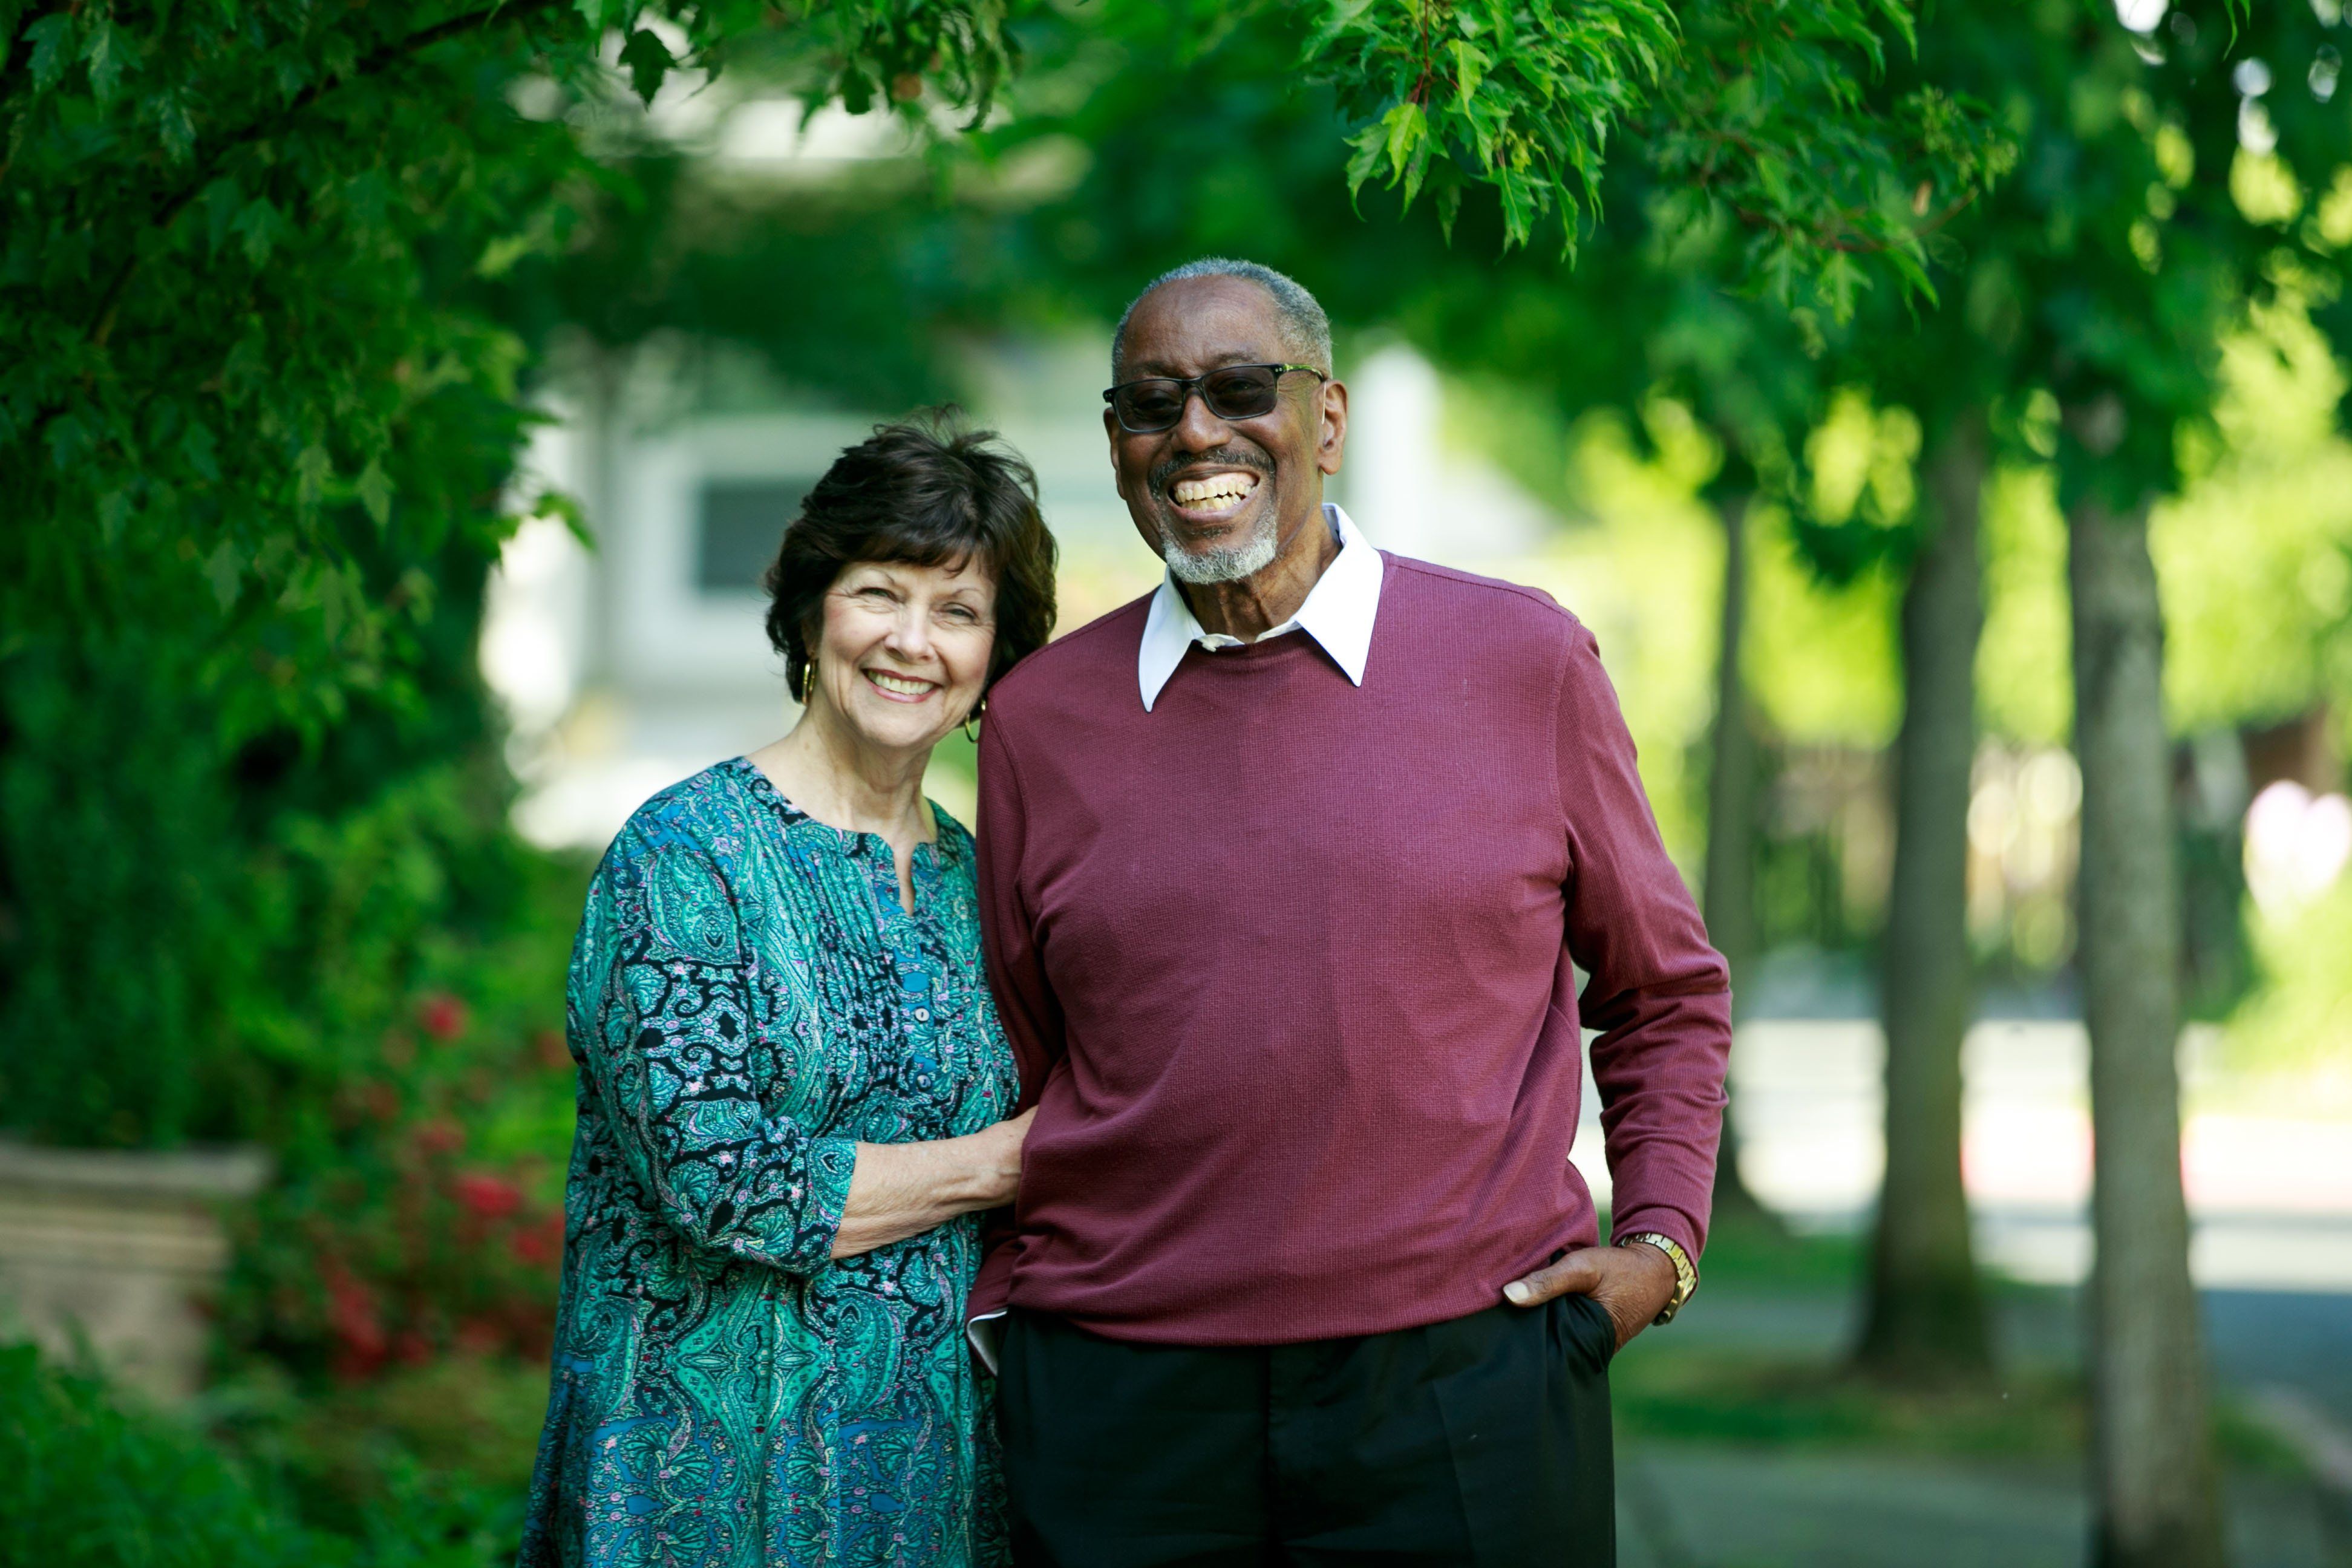 Seattle couple endured blatant prejudice Its been 50 years since high court ruled on interracial marriage The Seattle Times